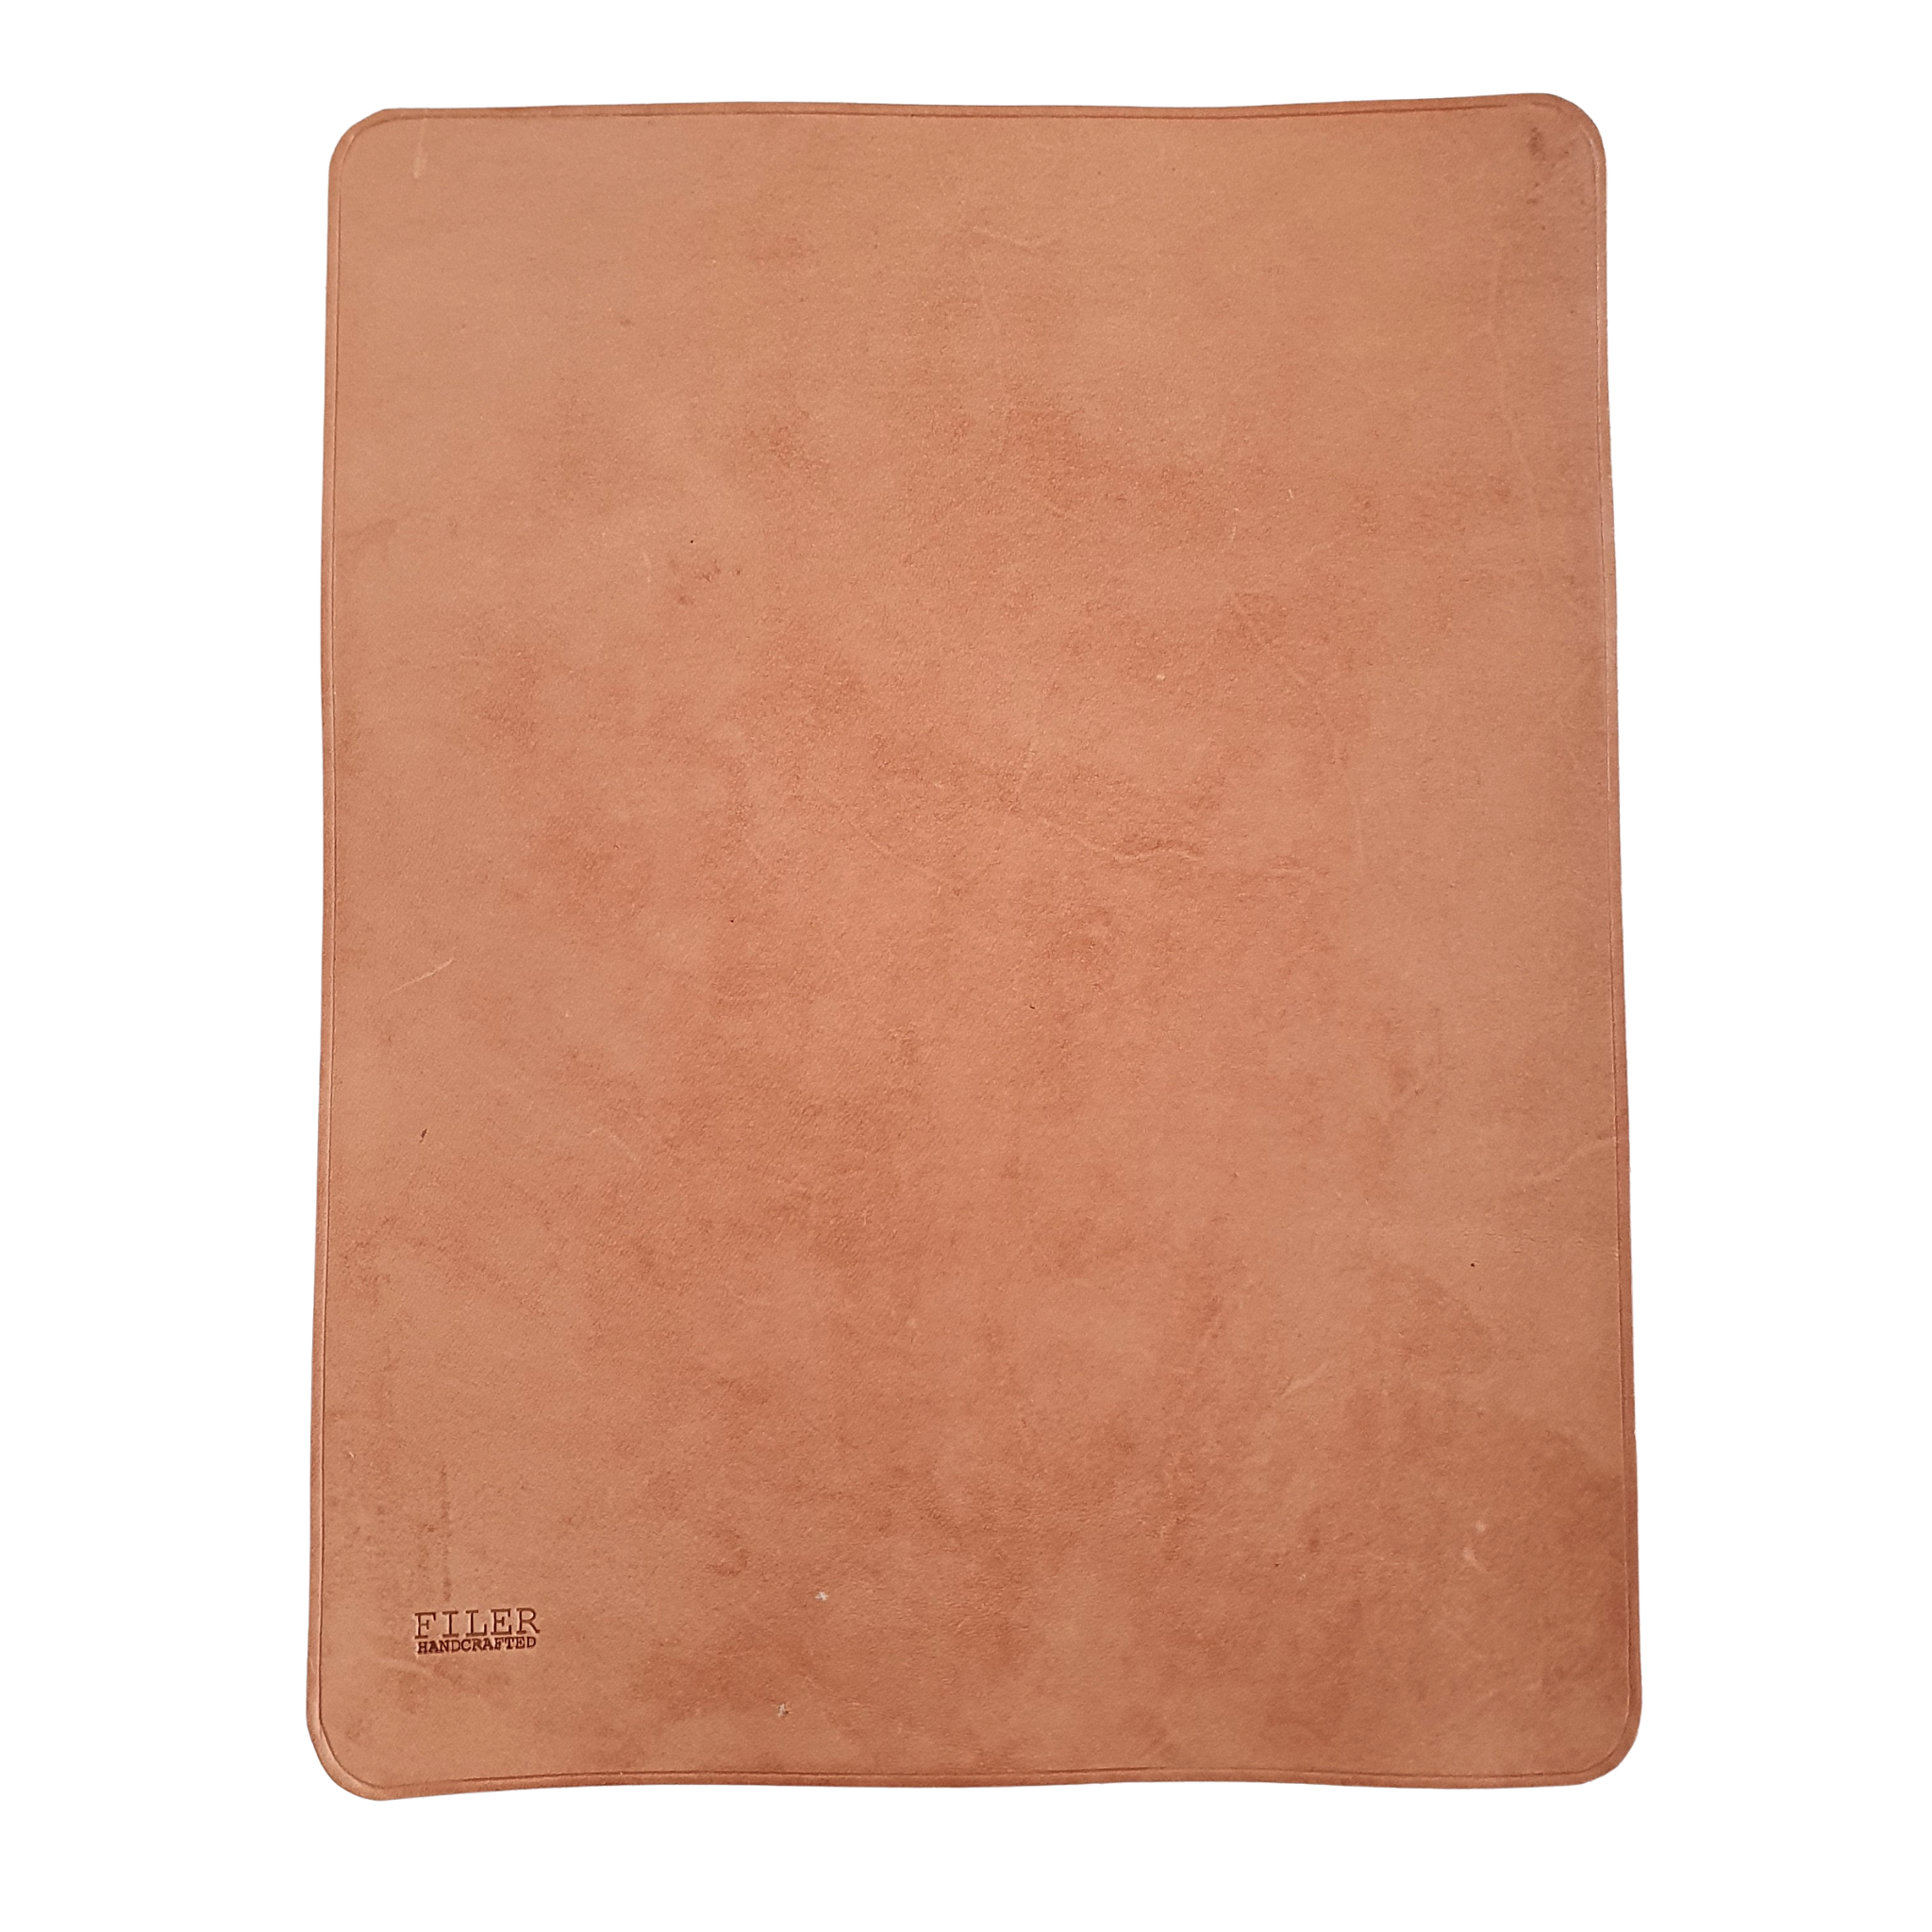 Mouse Pad - travel size -